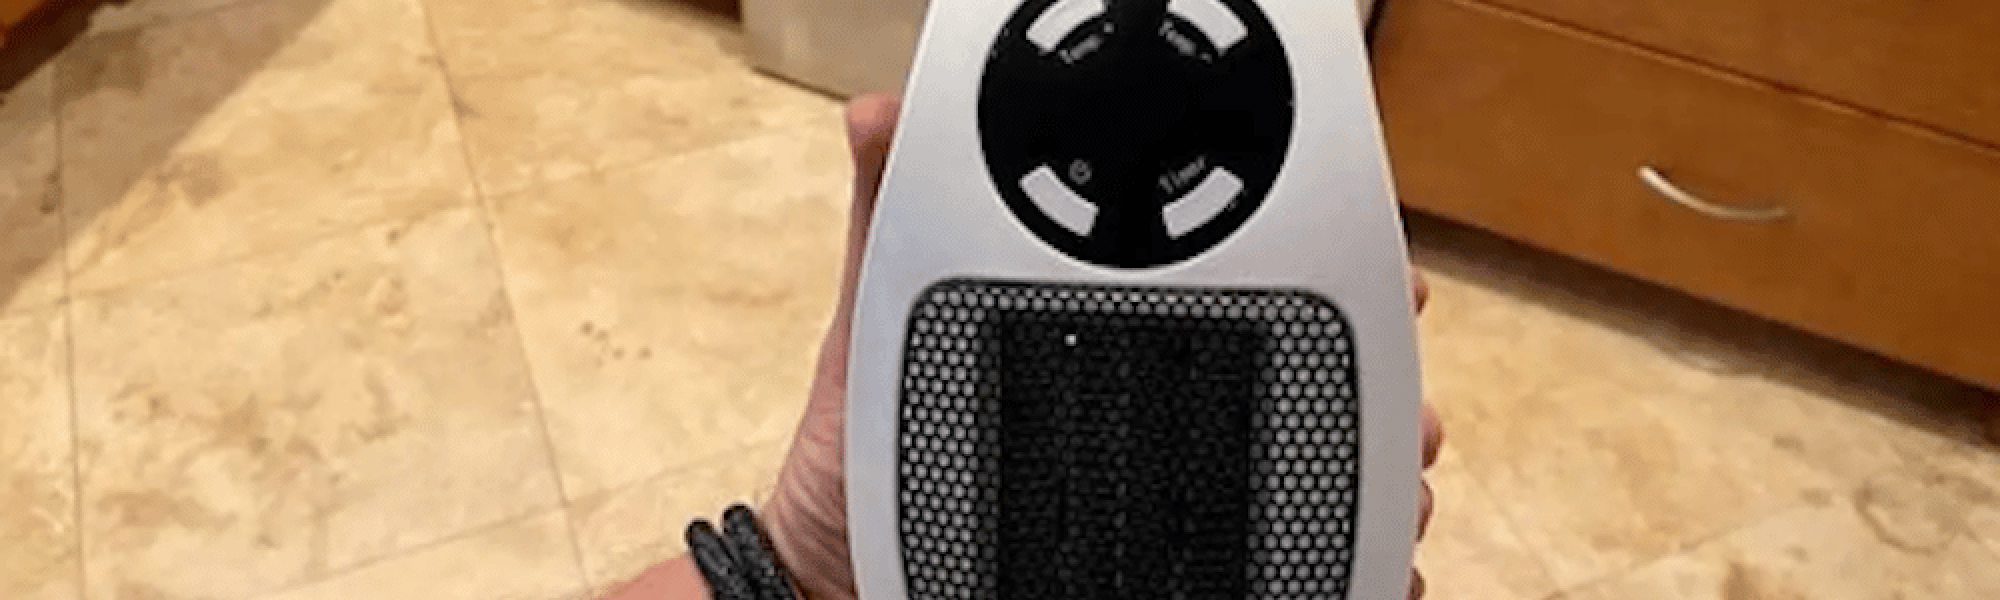 Alpha Heater Reviews (Customers reports Updated): Don’t Buy Alpha Heaters Till You Read This.